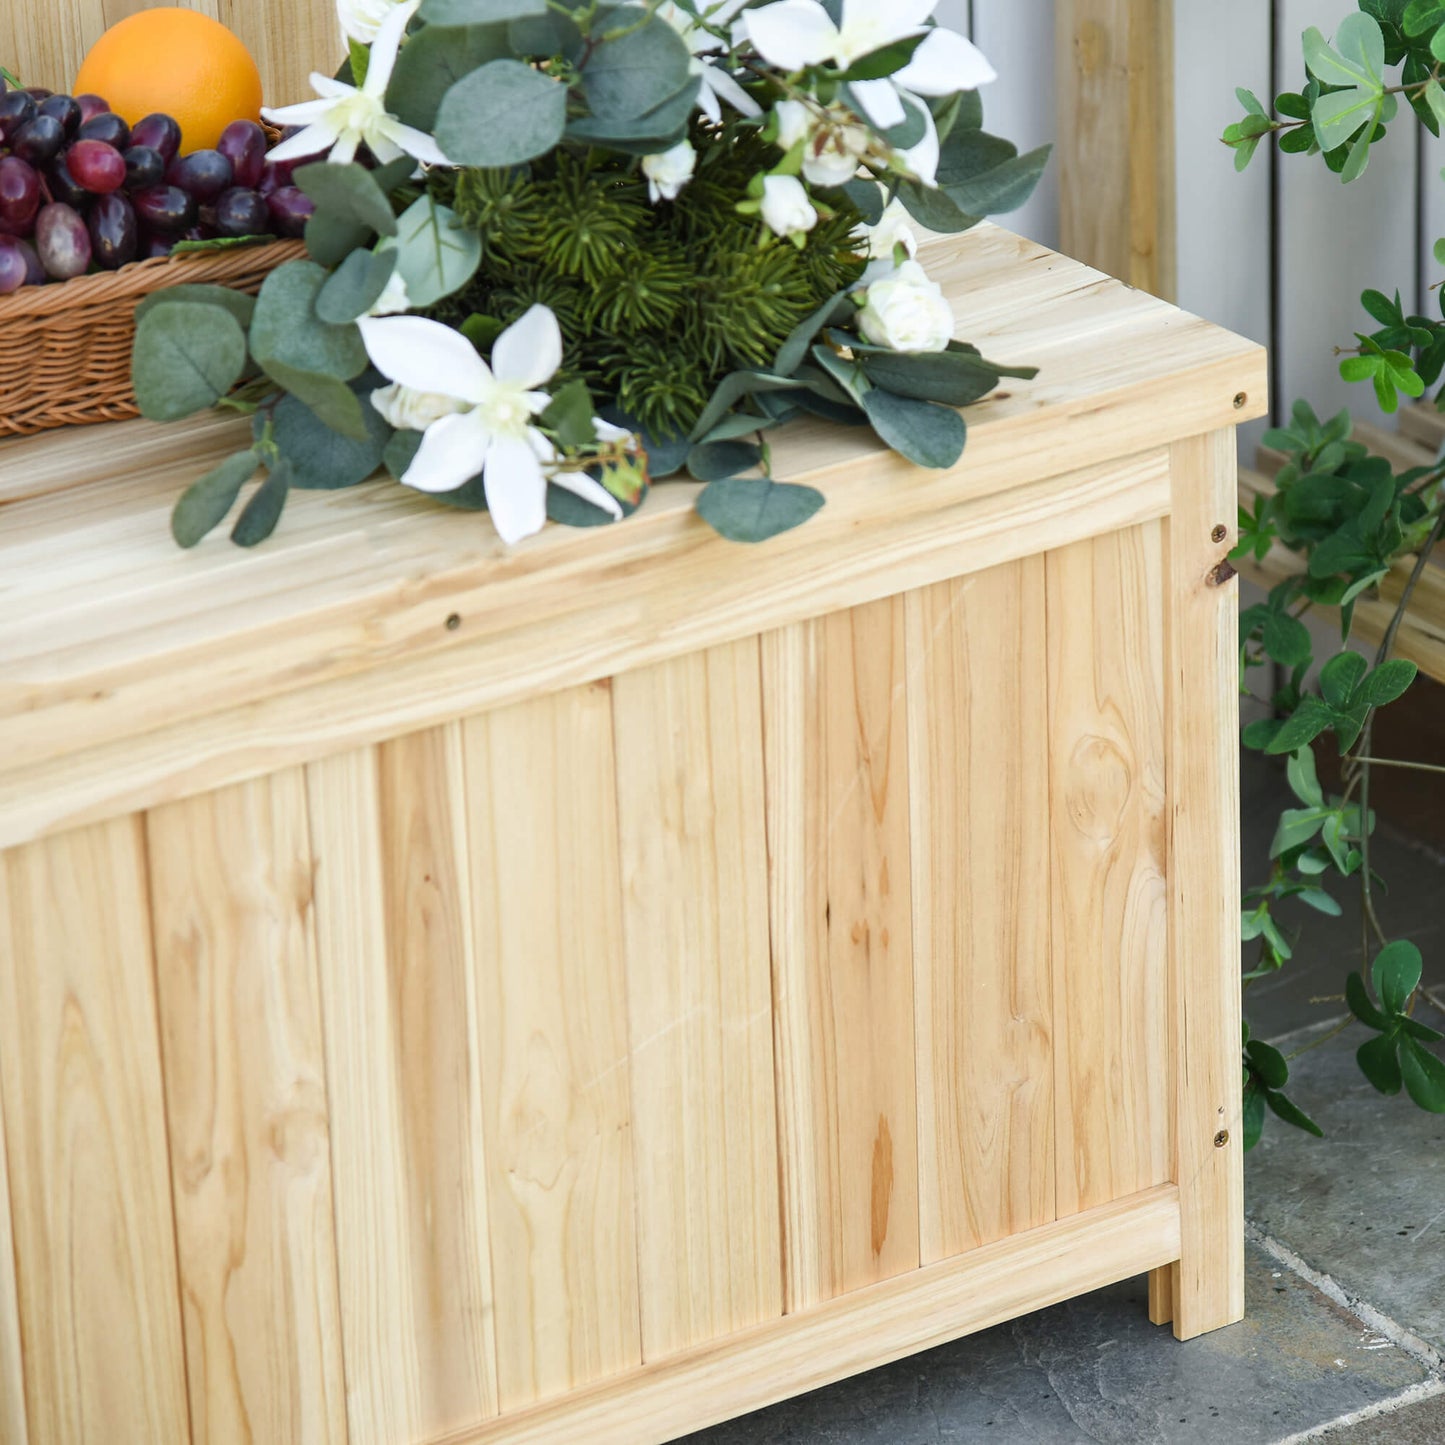 Outsunny Wood Storage Bench for Patio Furniture